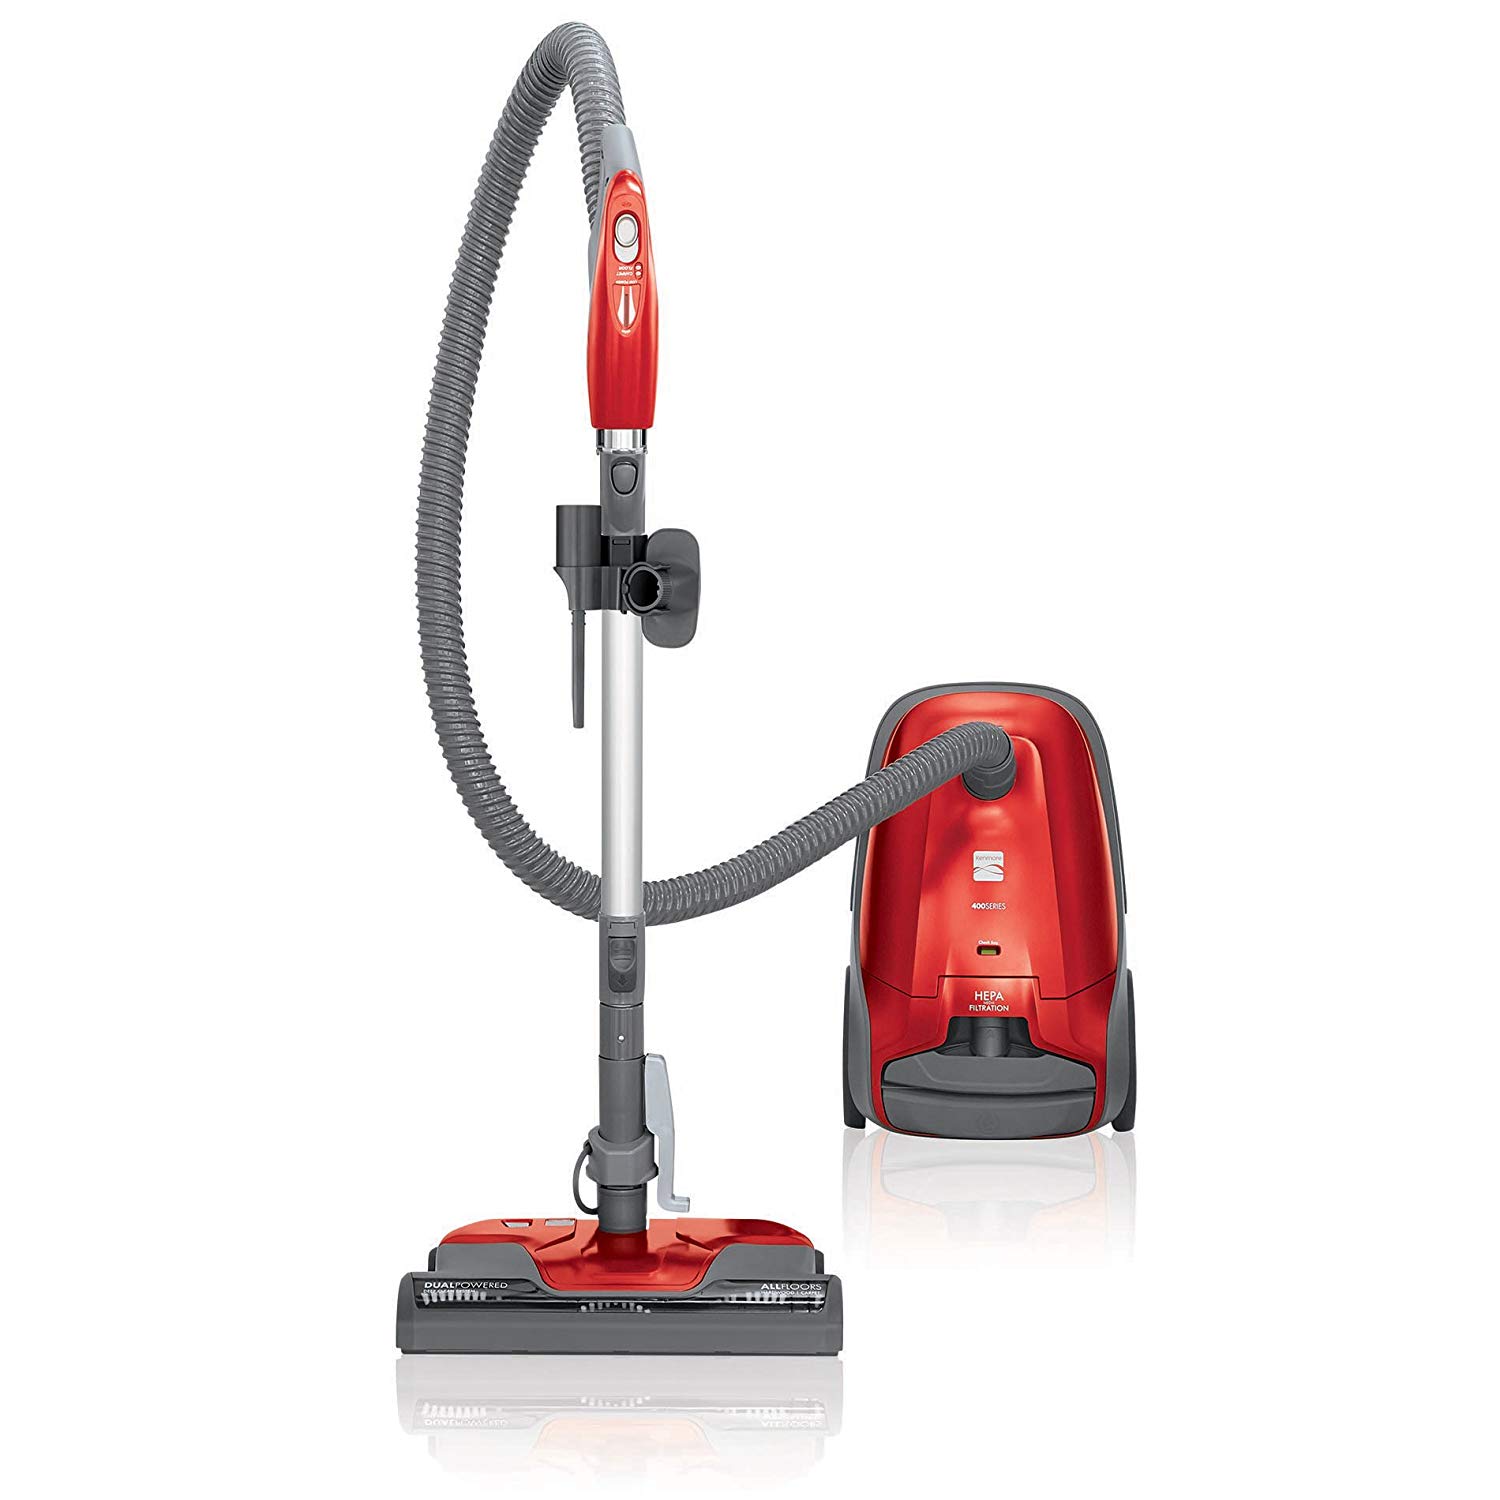 Kenmore 81414 400 series bagged canister vacuum cleaner in red